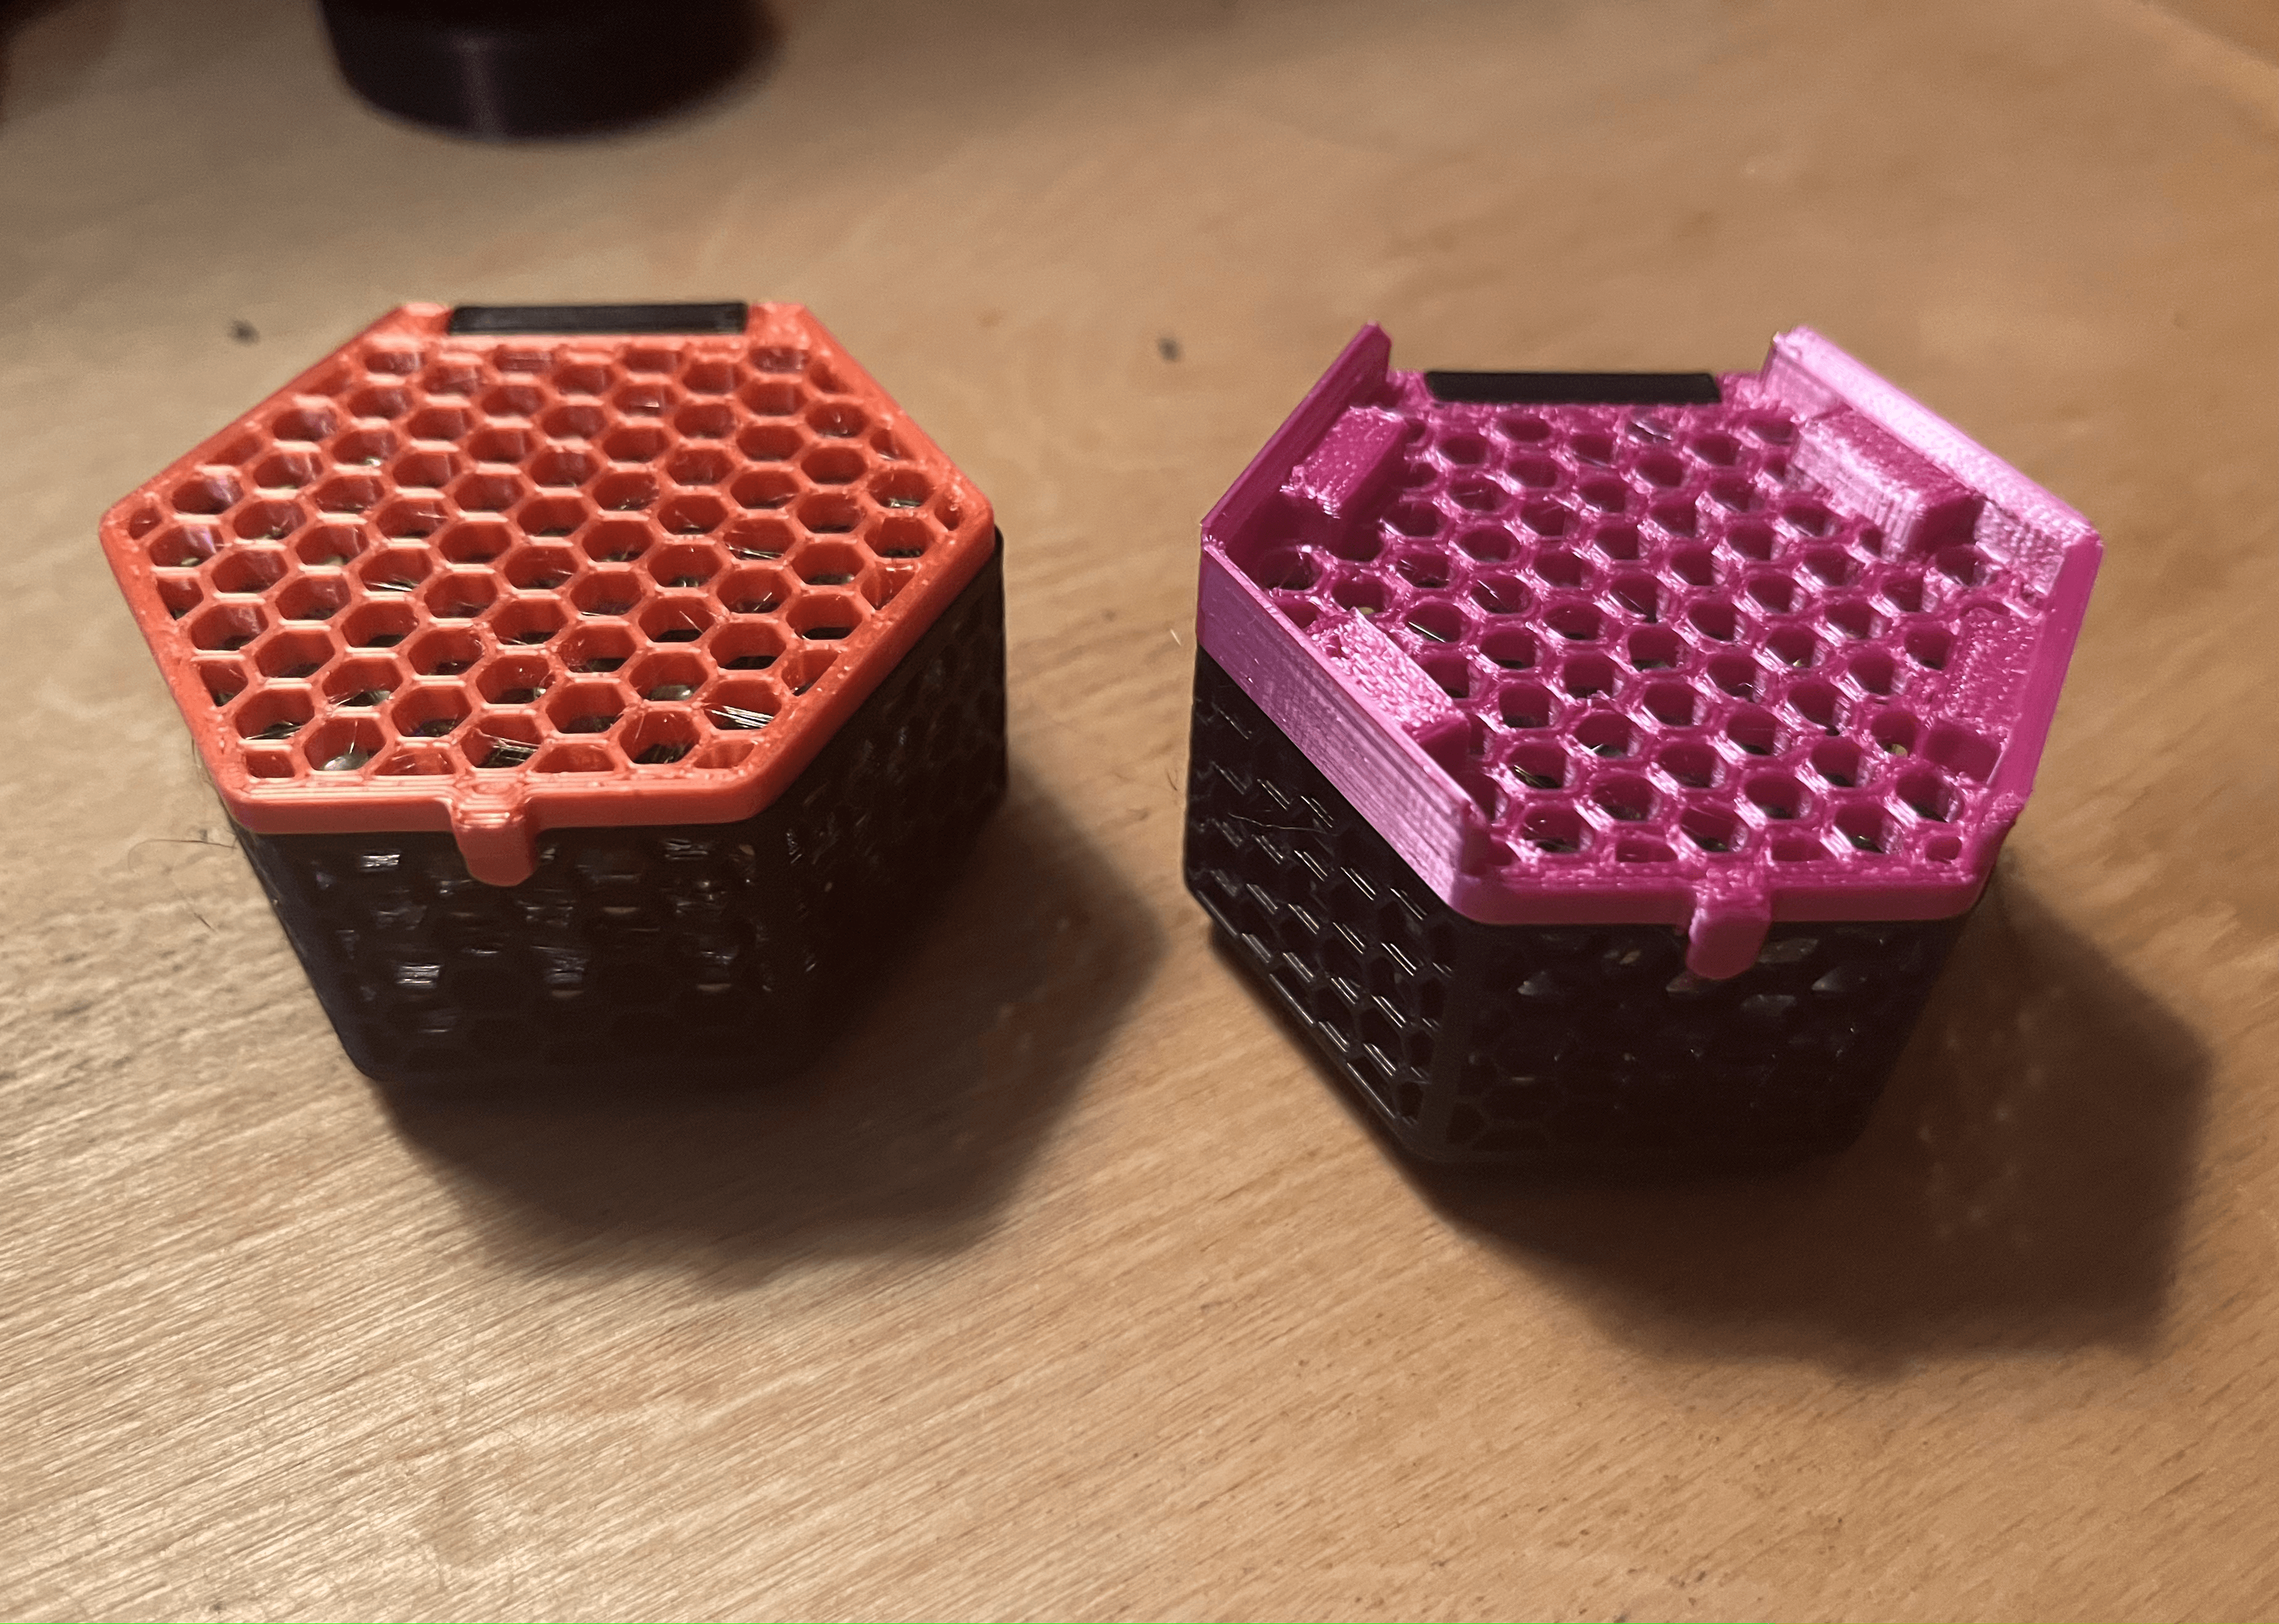 The Ultimate Hextraction Storage Box 3d model